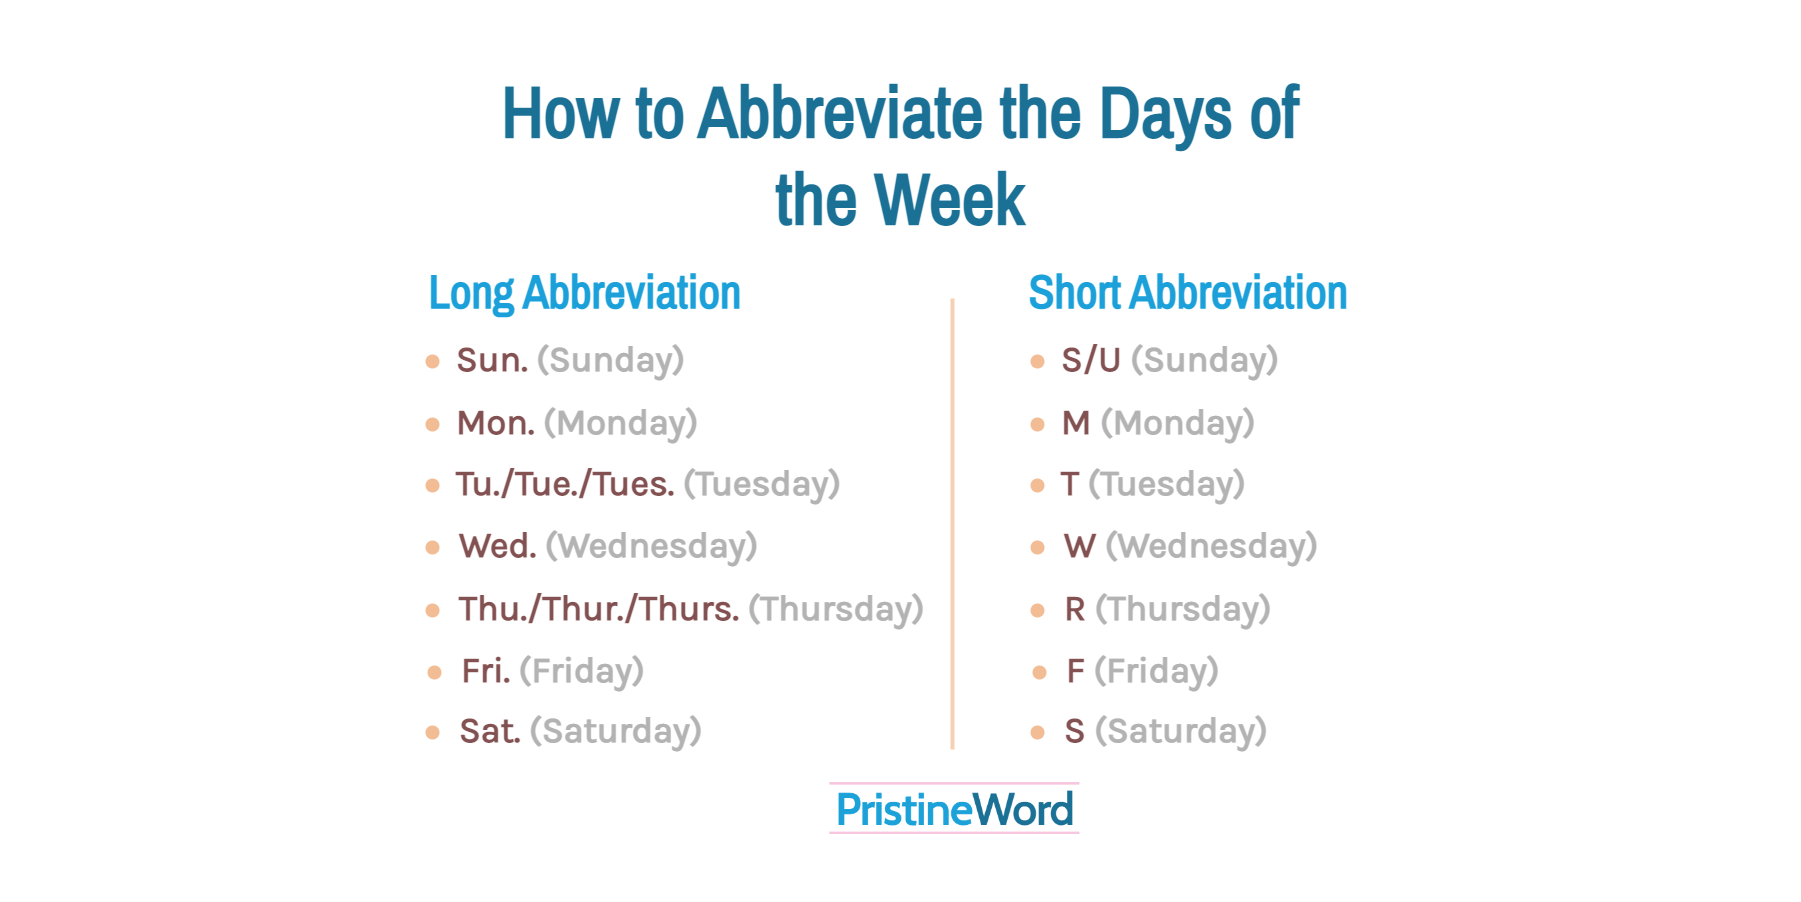 How to Abbreviate the Days of the Week